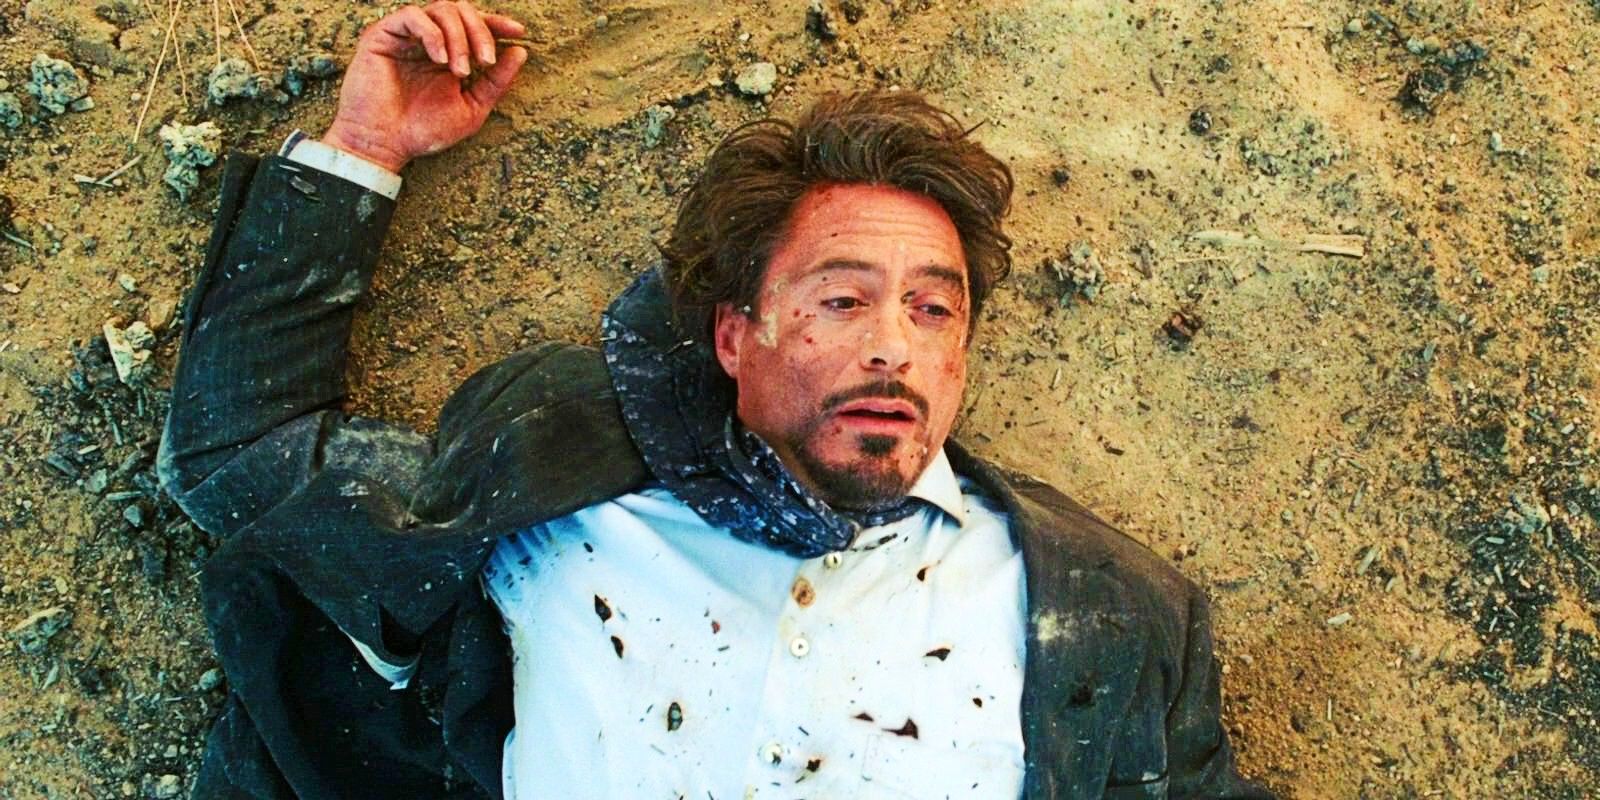 Robert Downey Jr As Tony Stark Laying On The Ground Covered In Shrapnel In Iron Man 2008